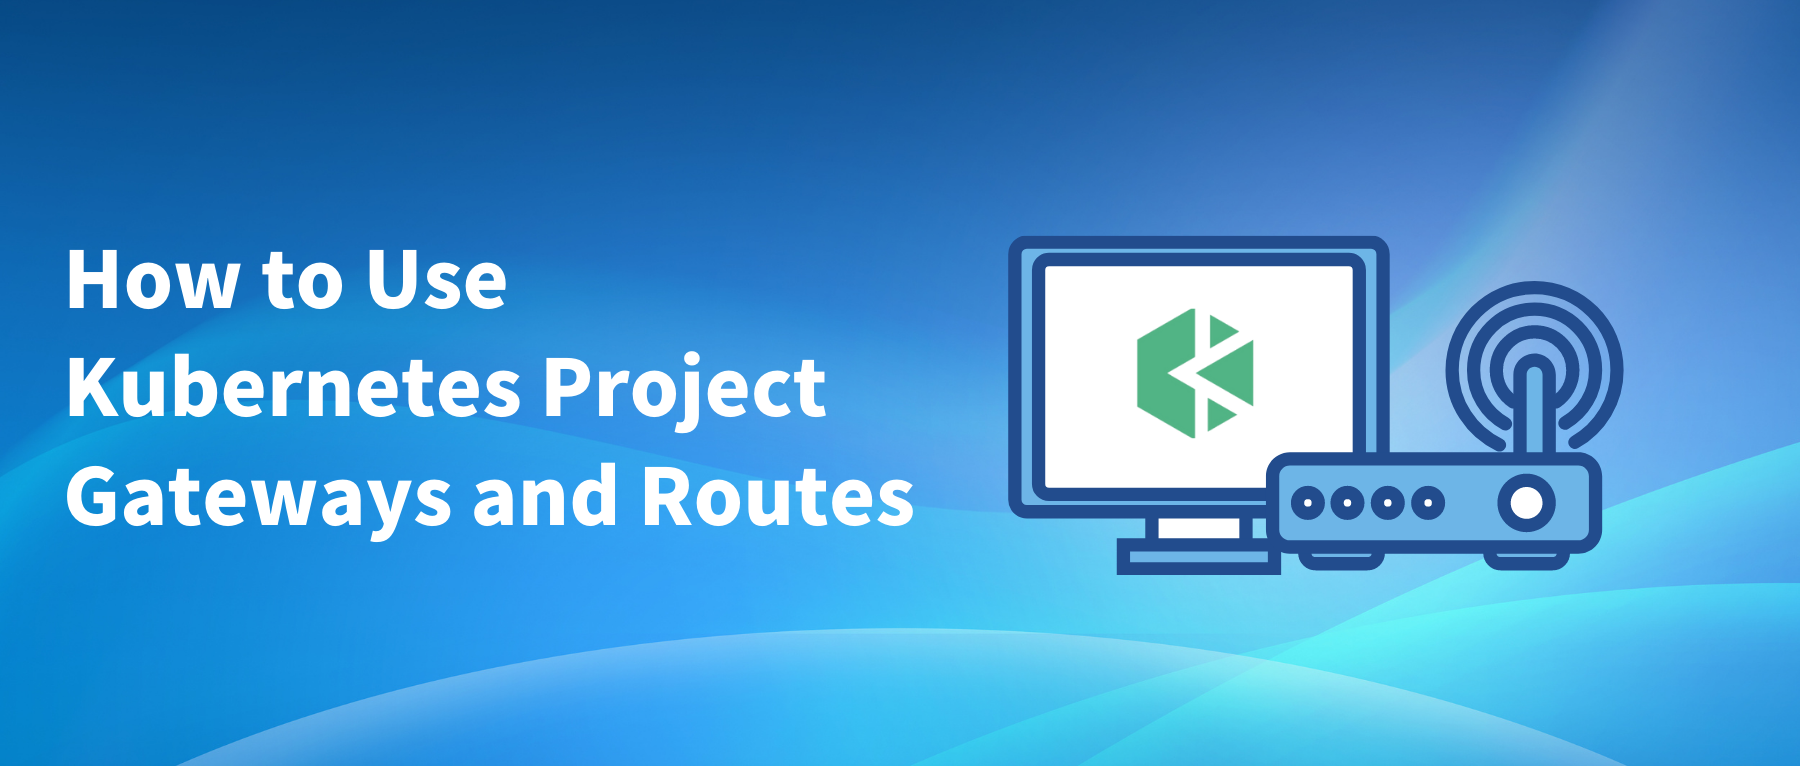 How to Use KubeSphere Project Gateways and Routes